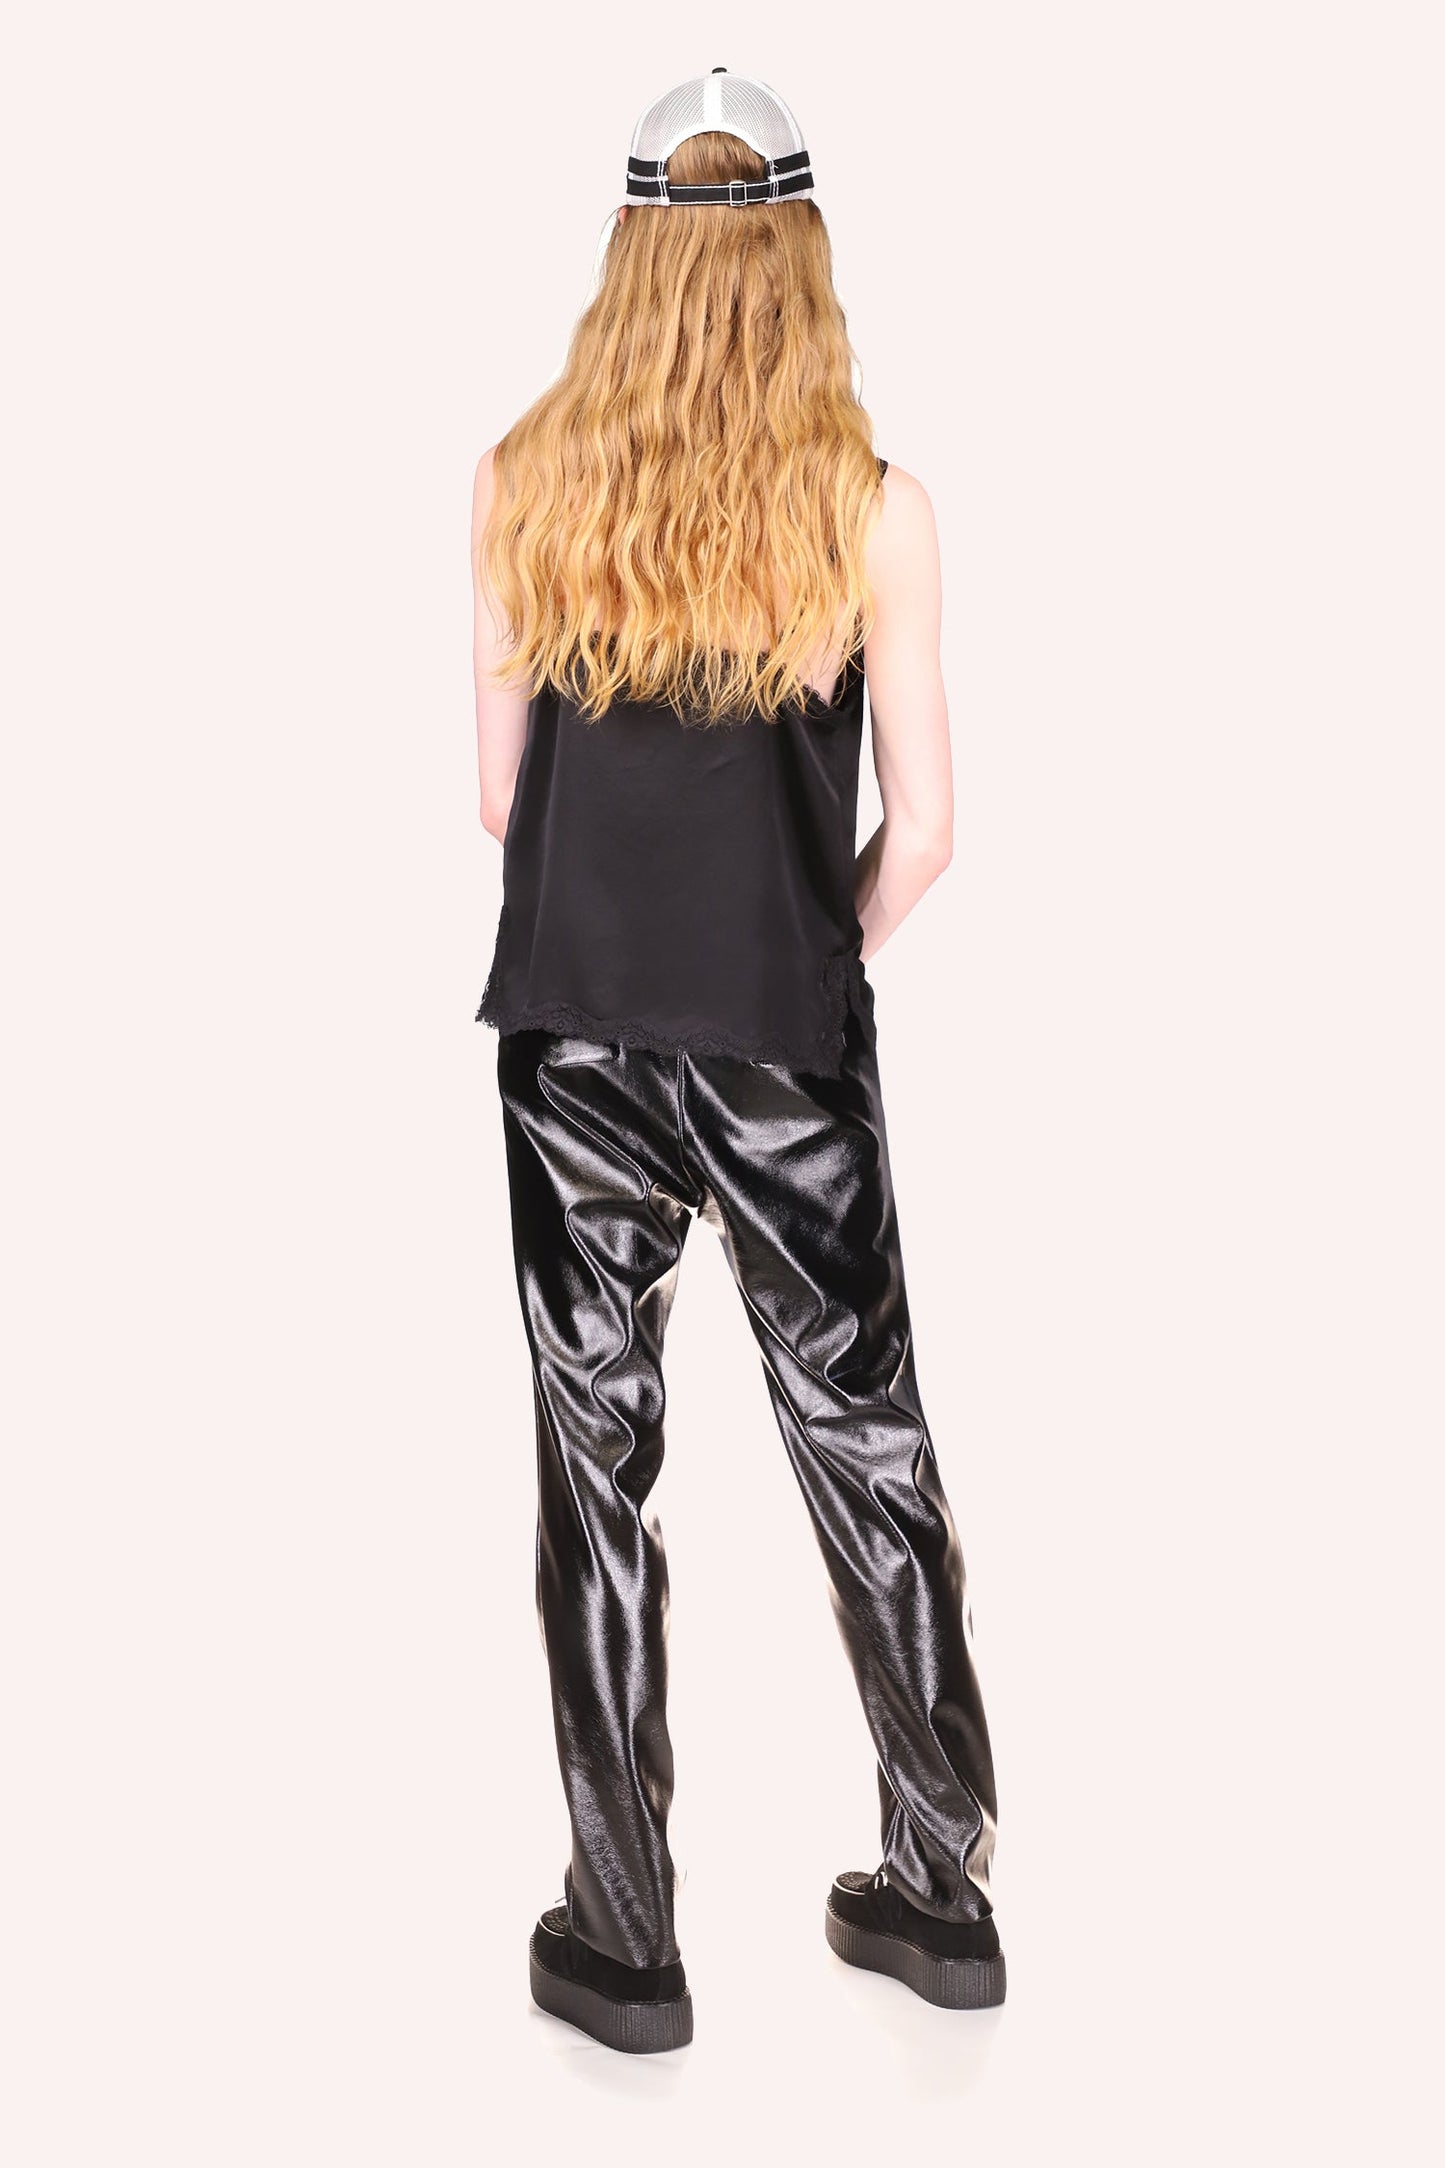 Washed Satin Cami in Black deep cut in the back, can be worn with Genderless Black Patent Pants